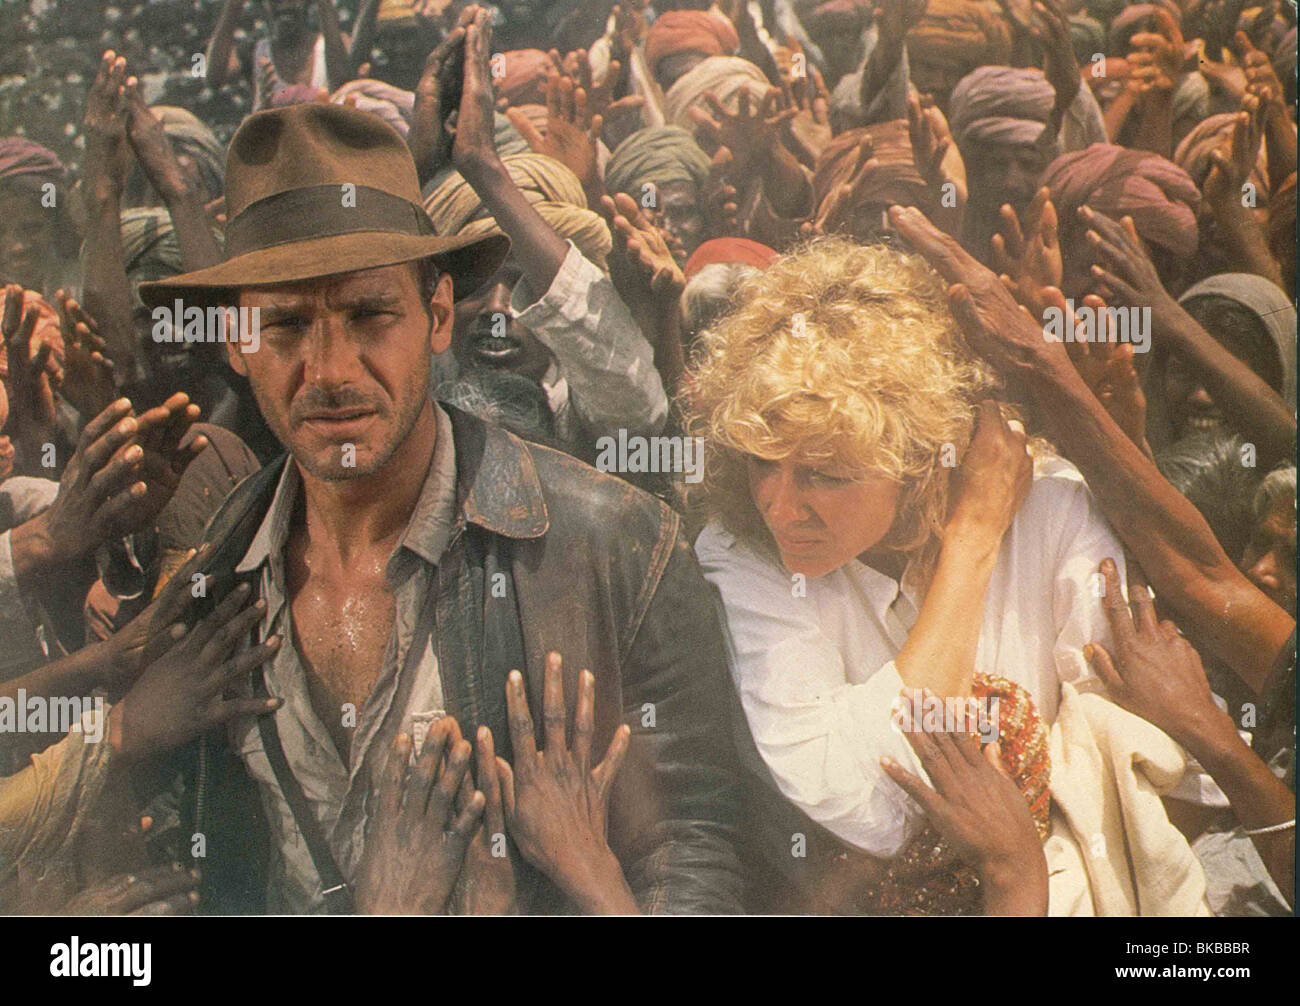 INDIANA JONES AND THE TEMPLE OF DOOM (1984) HARRISON FORD, KATE CAPSHAW INT 007FOH Stock Photo